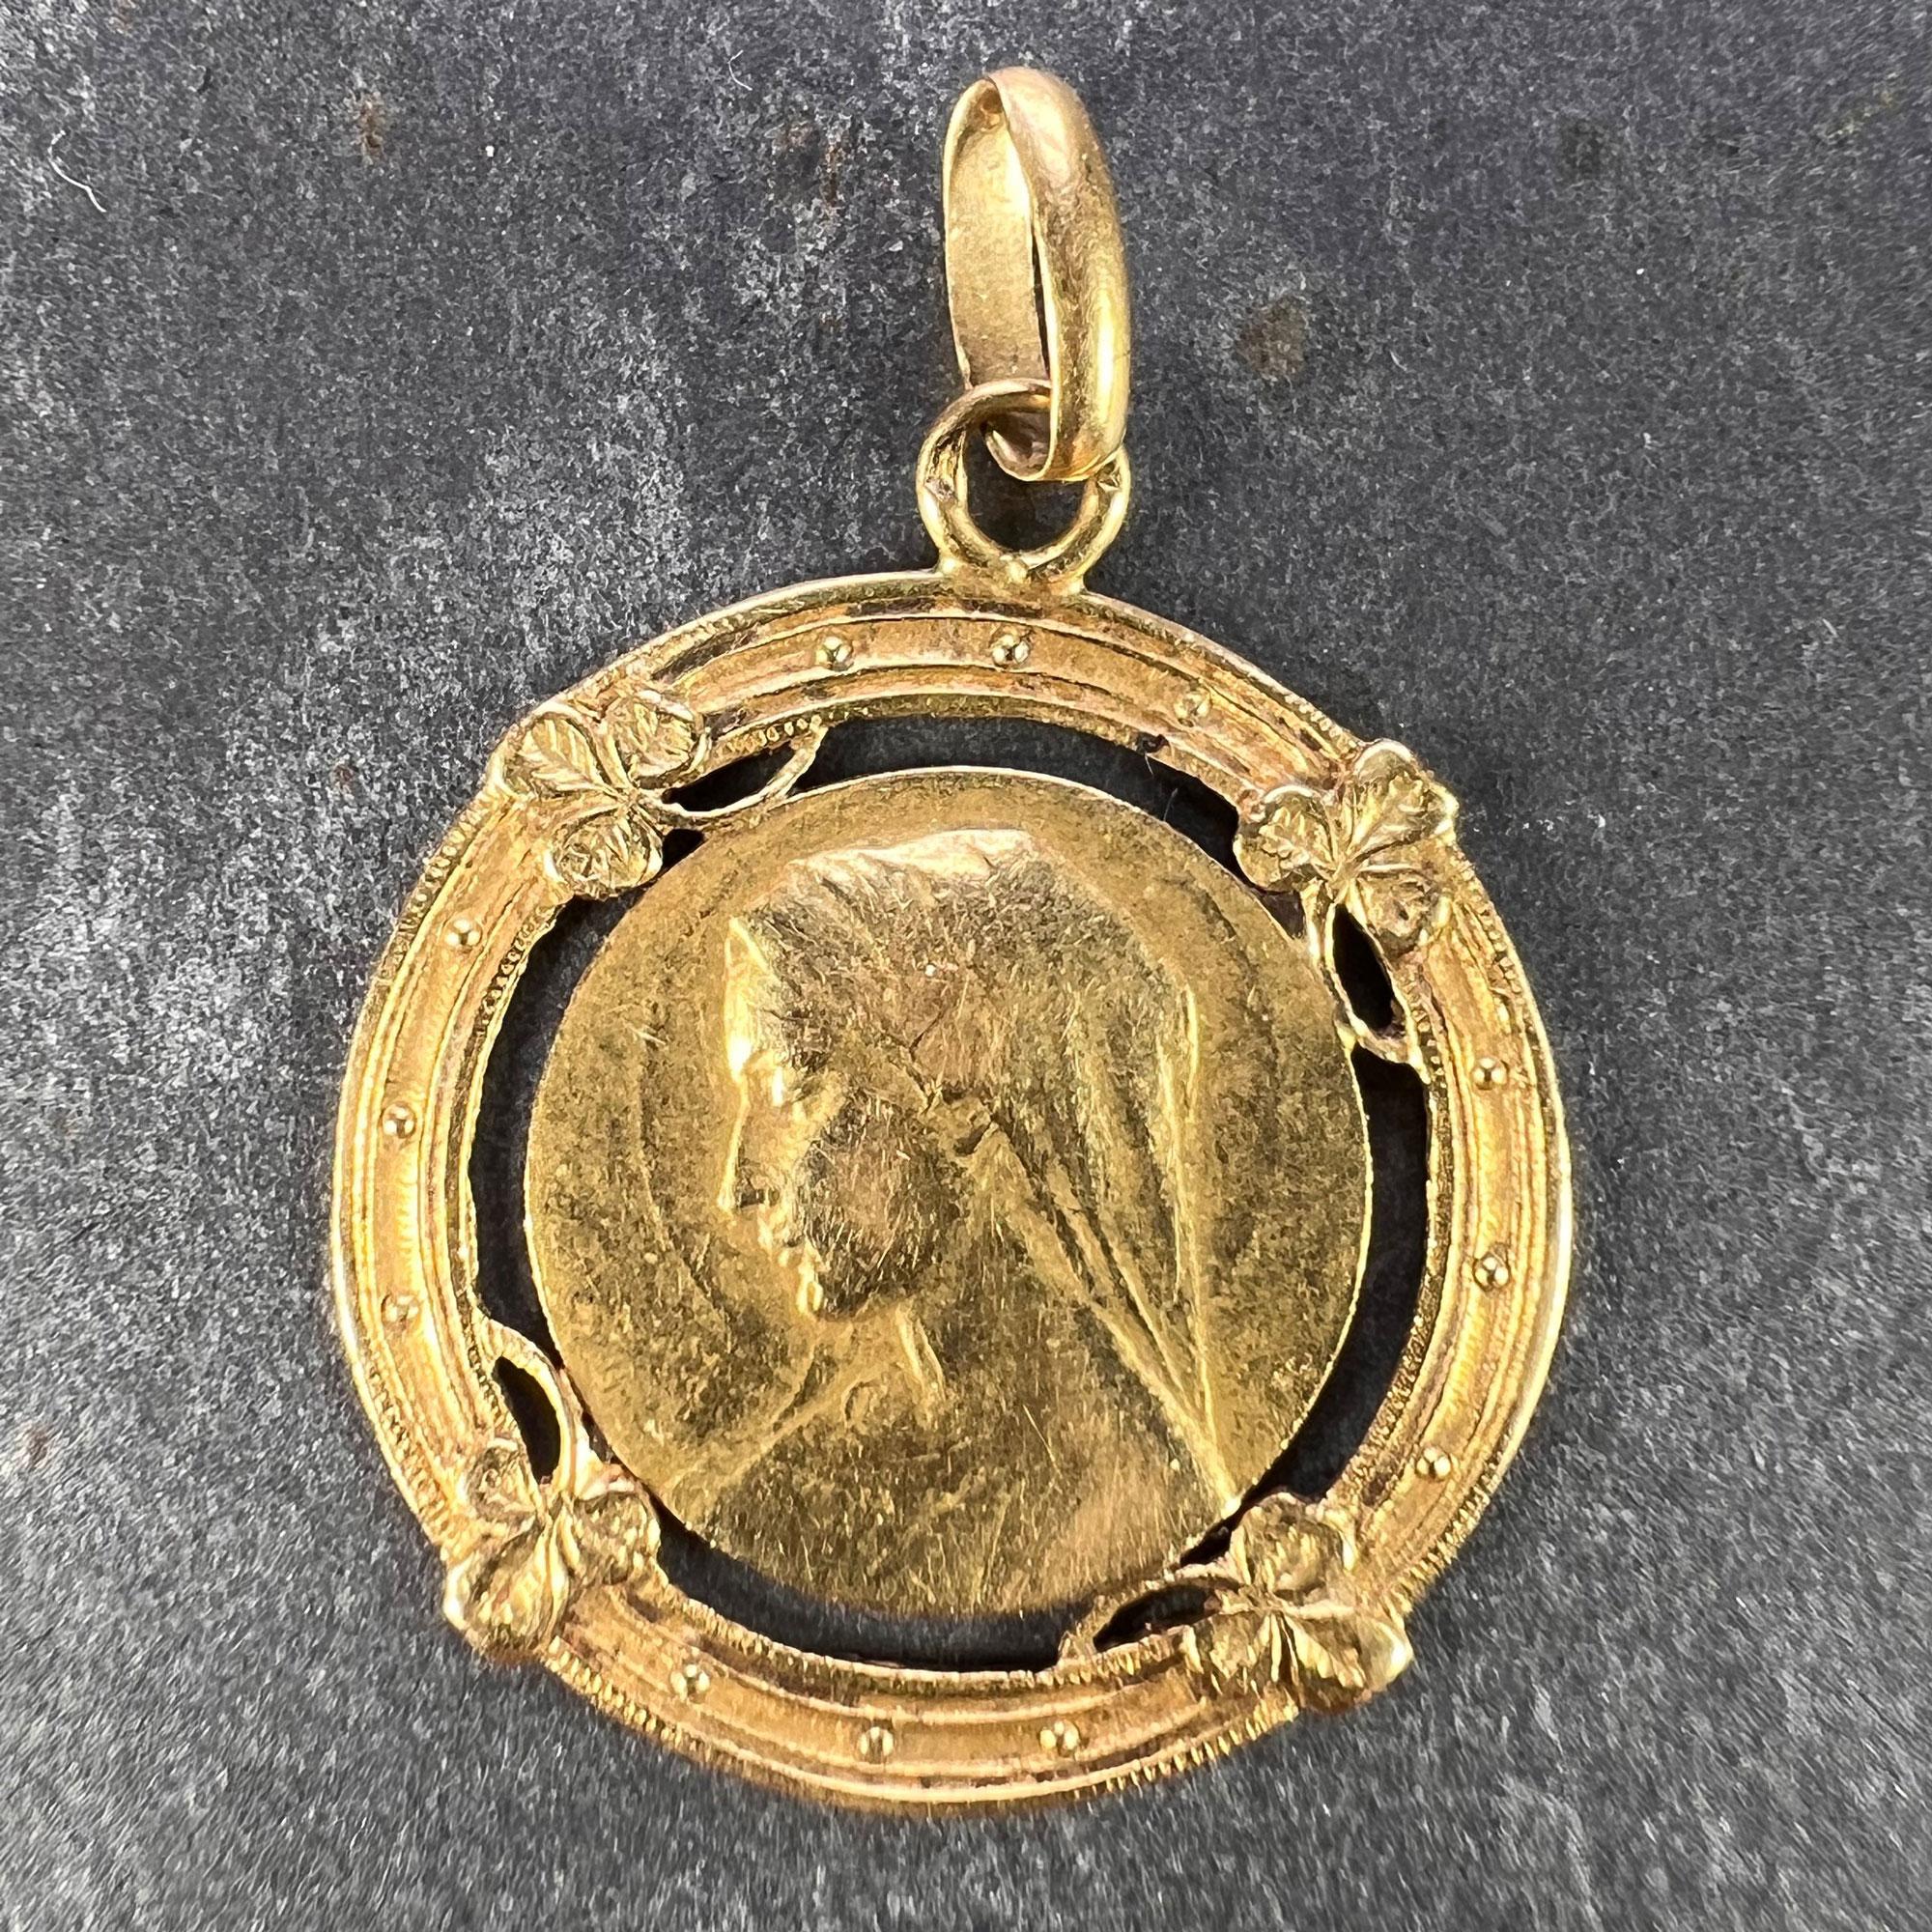 A French 18 karat (18K) yellow gold charm pendant designed as a round medal depicting the Virgin Mary within a pierced frame of lucky clover leaves. The leaves also engraved to the reverse. Stamped with the eagle's head for French manufacture and 18